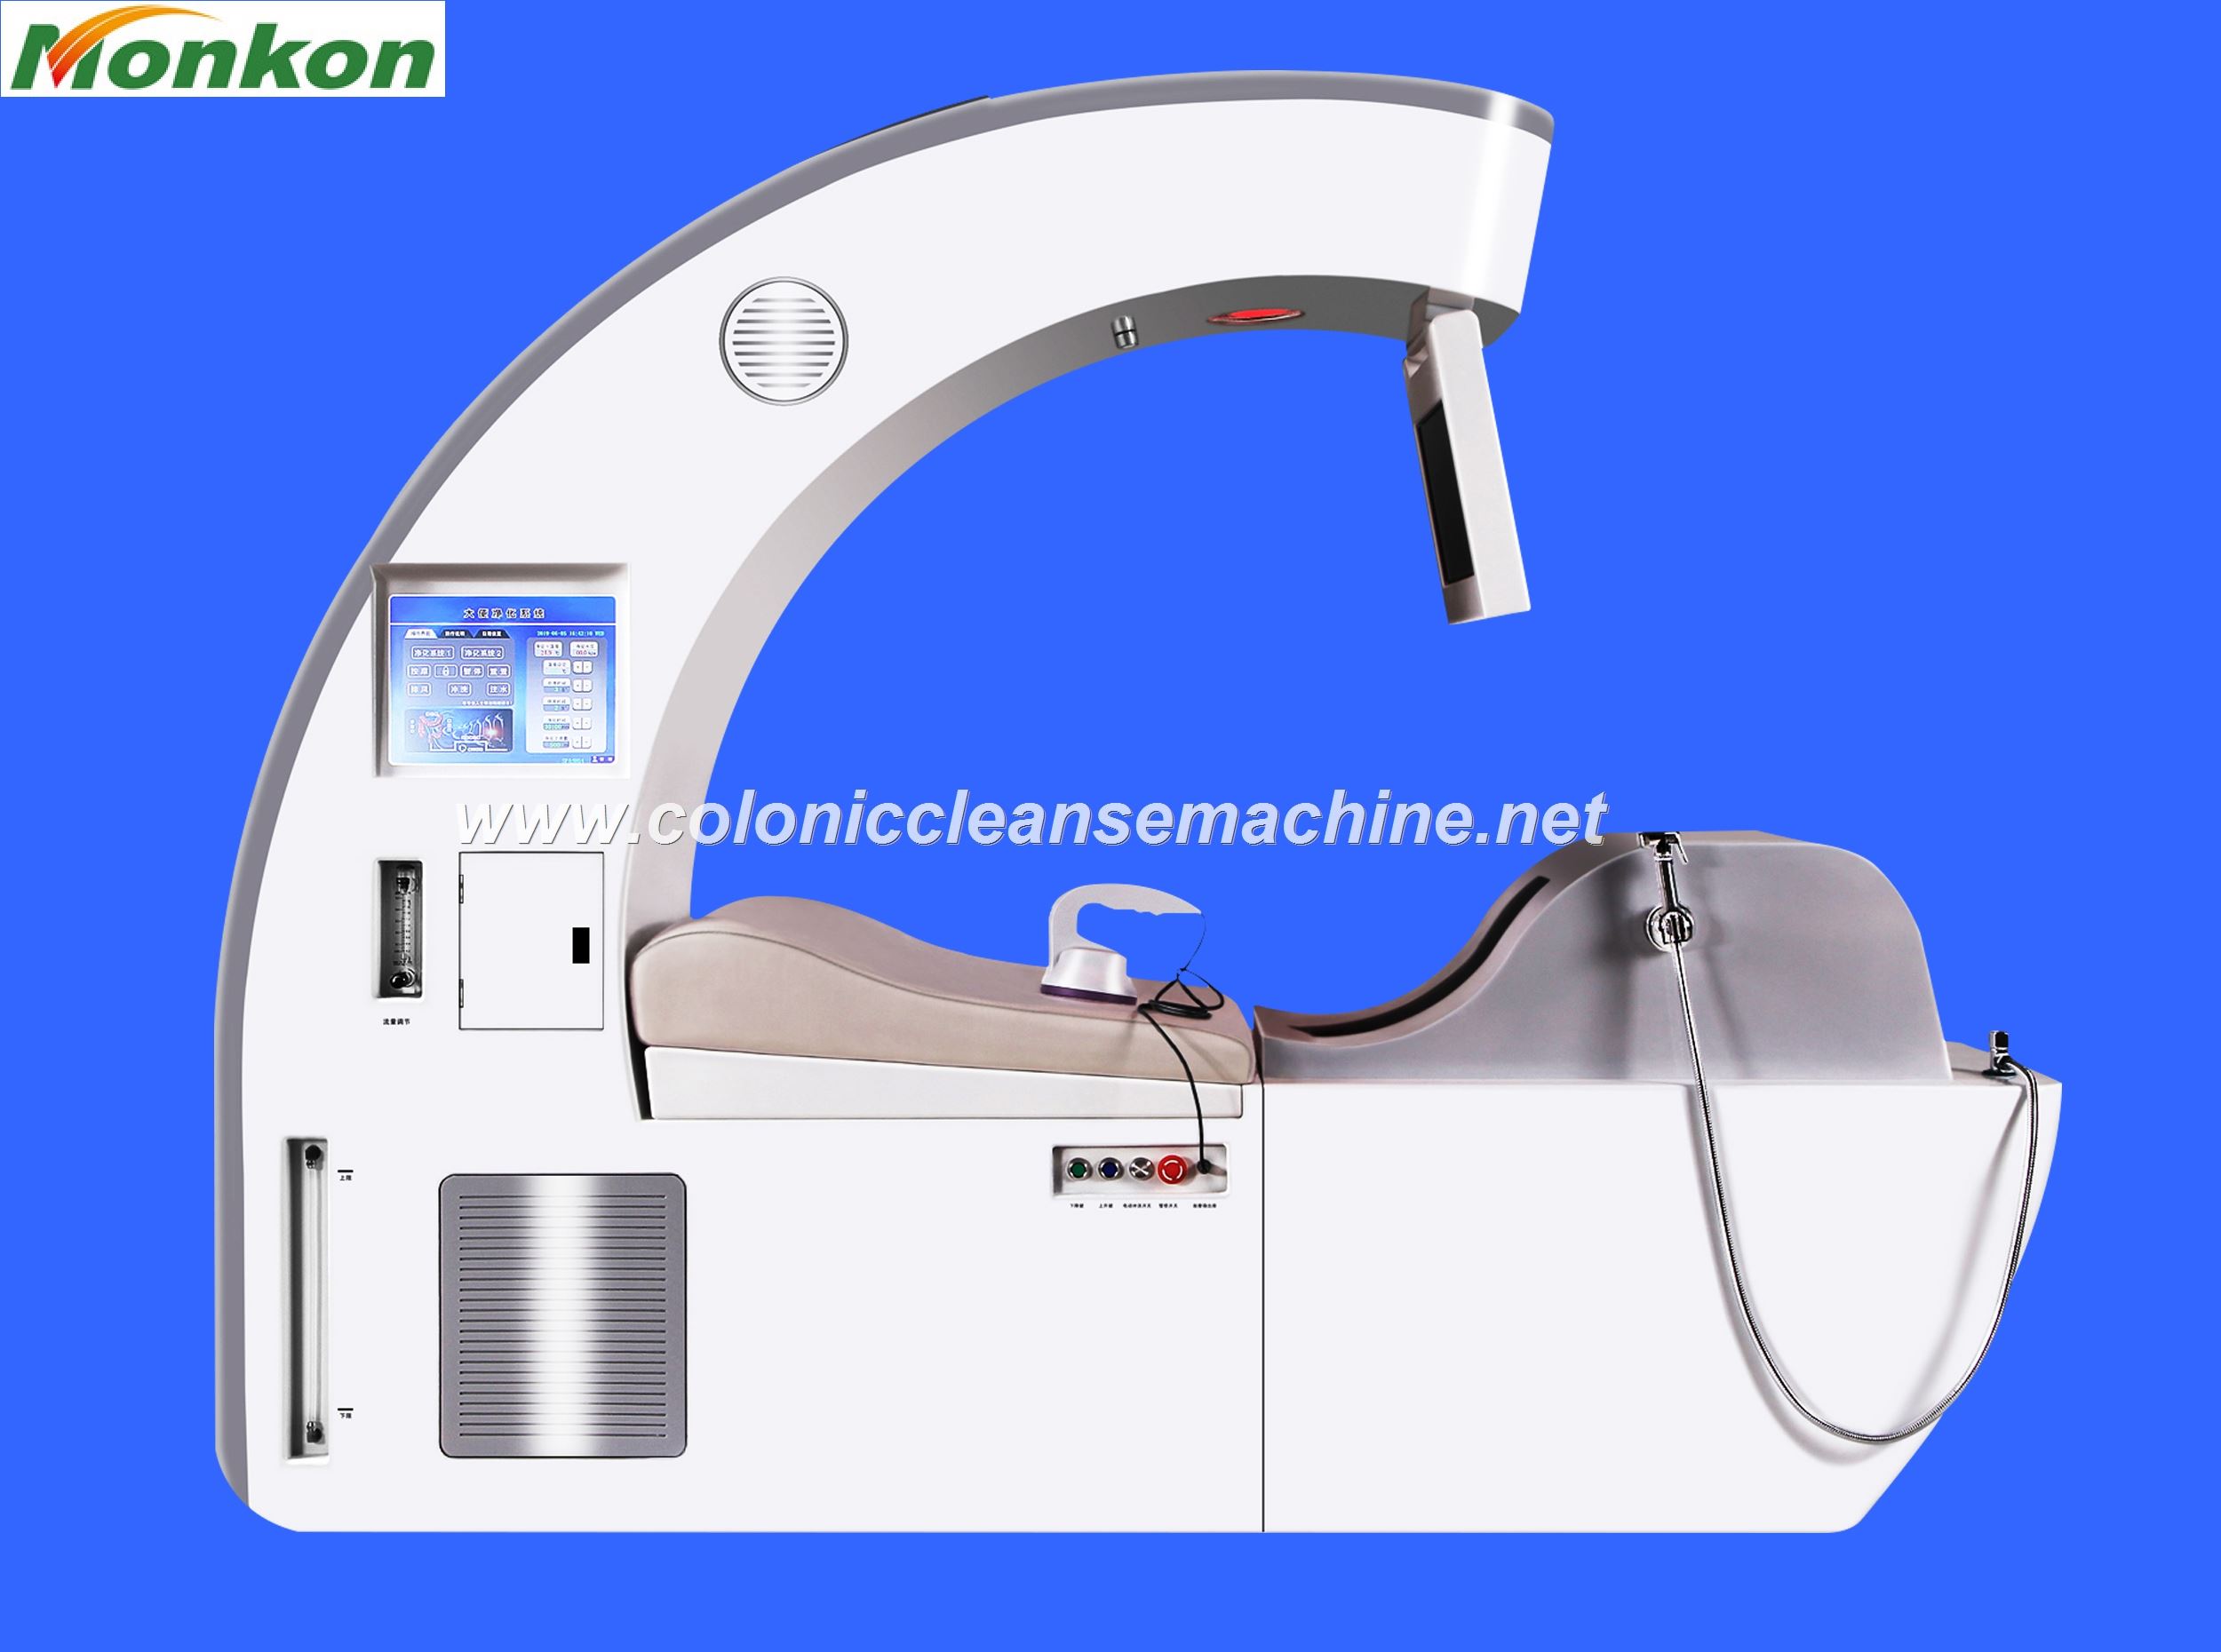 MAIKONG Medical Colon Cleanse Machine